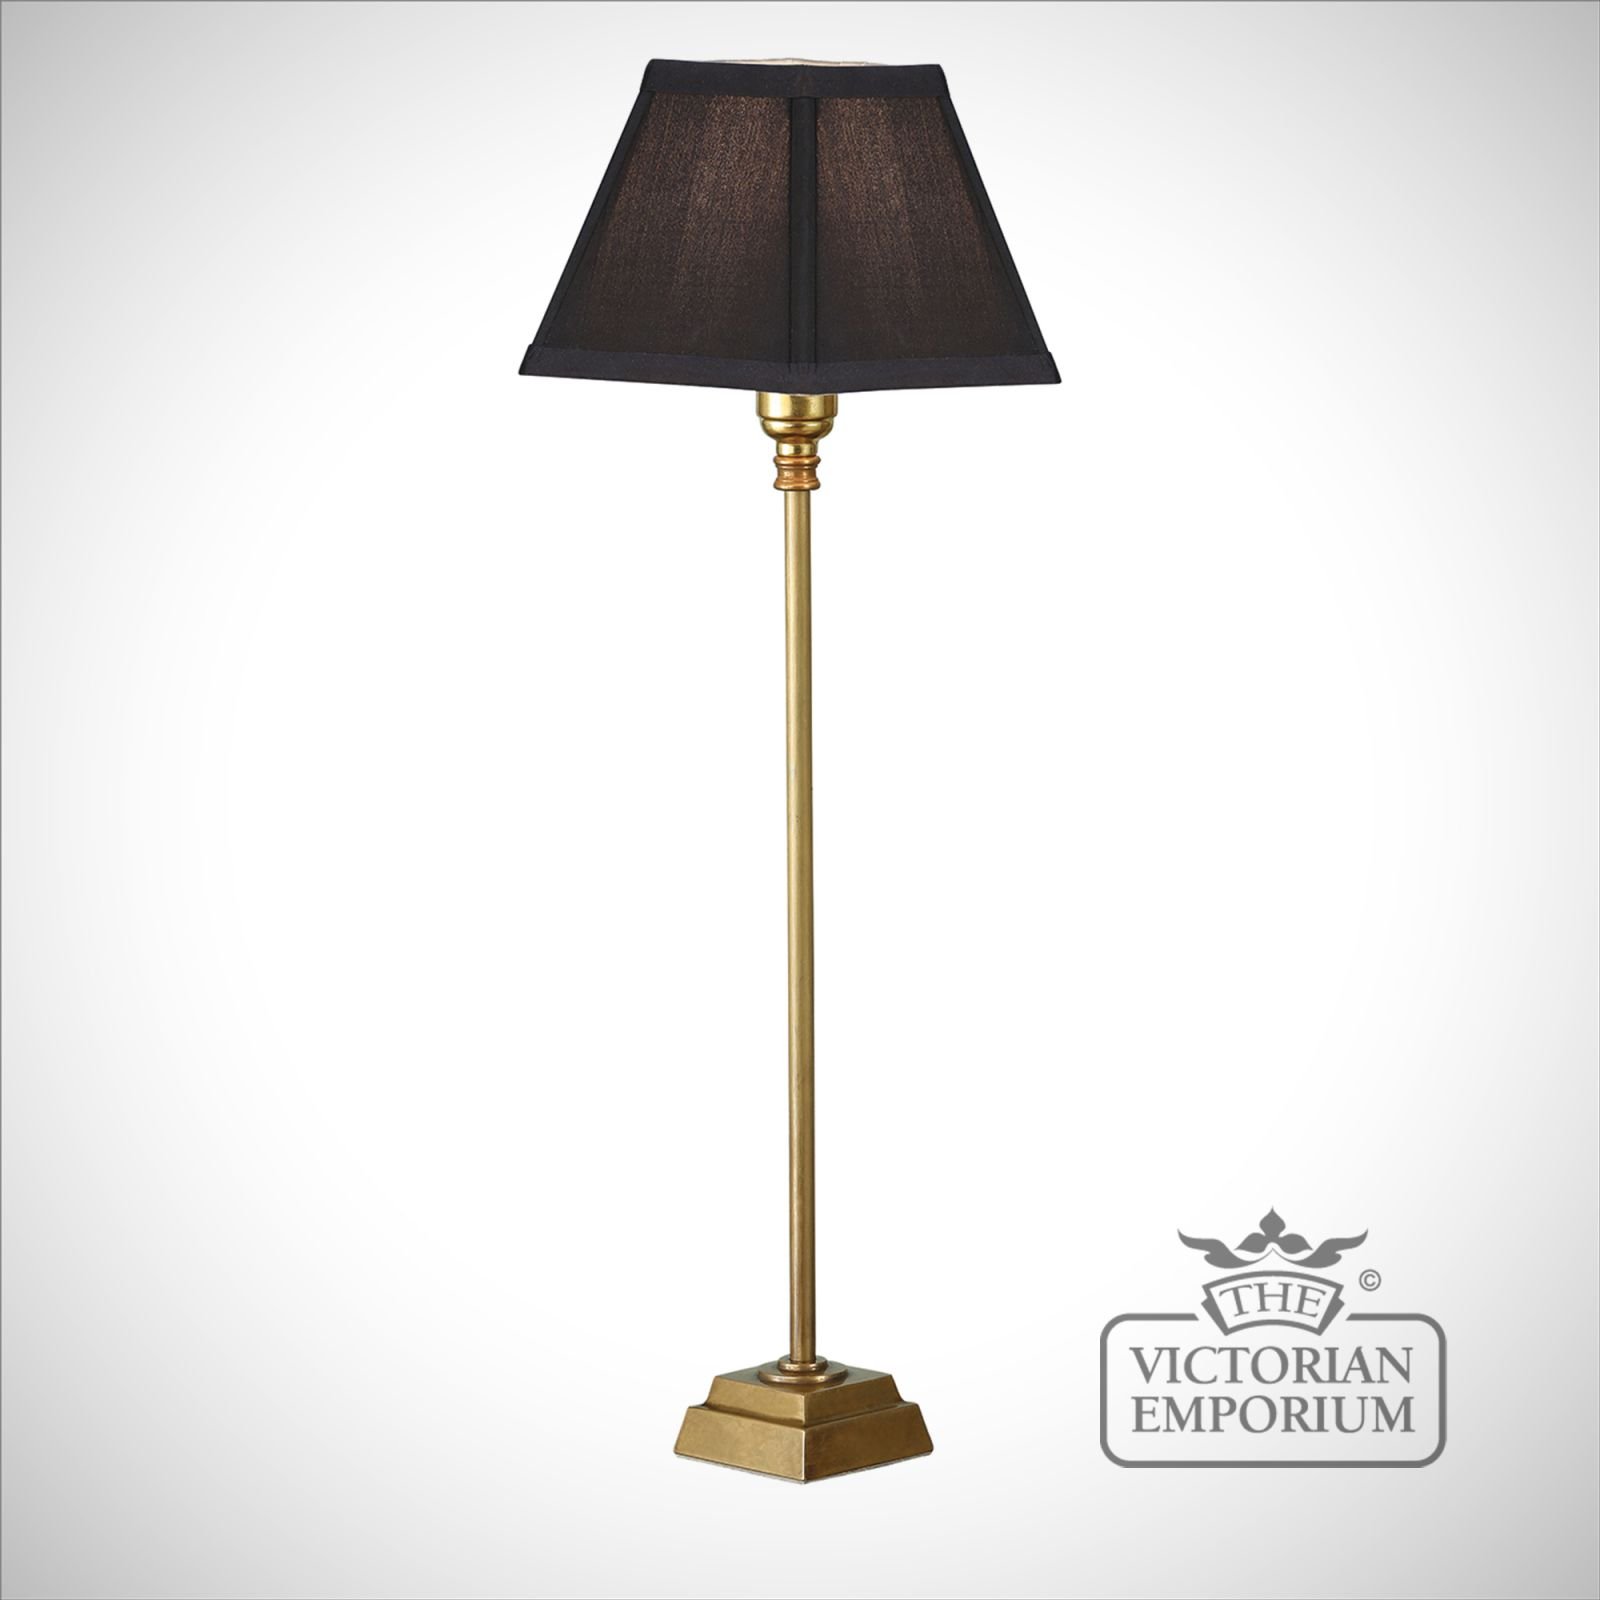 Wentworth Table lamp